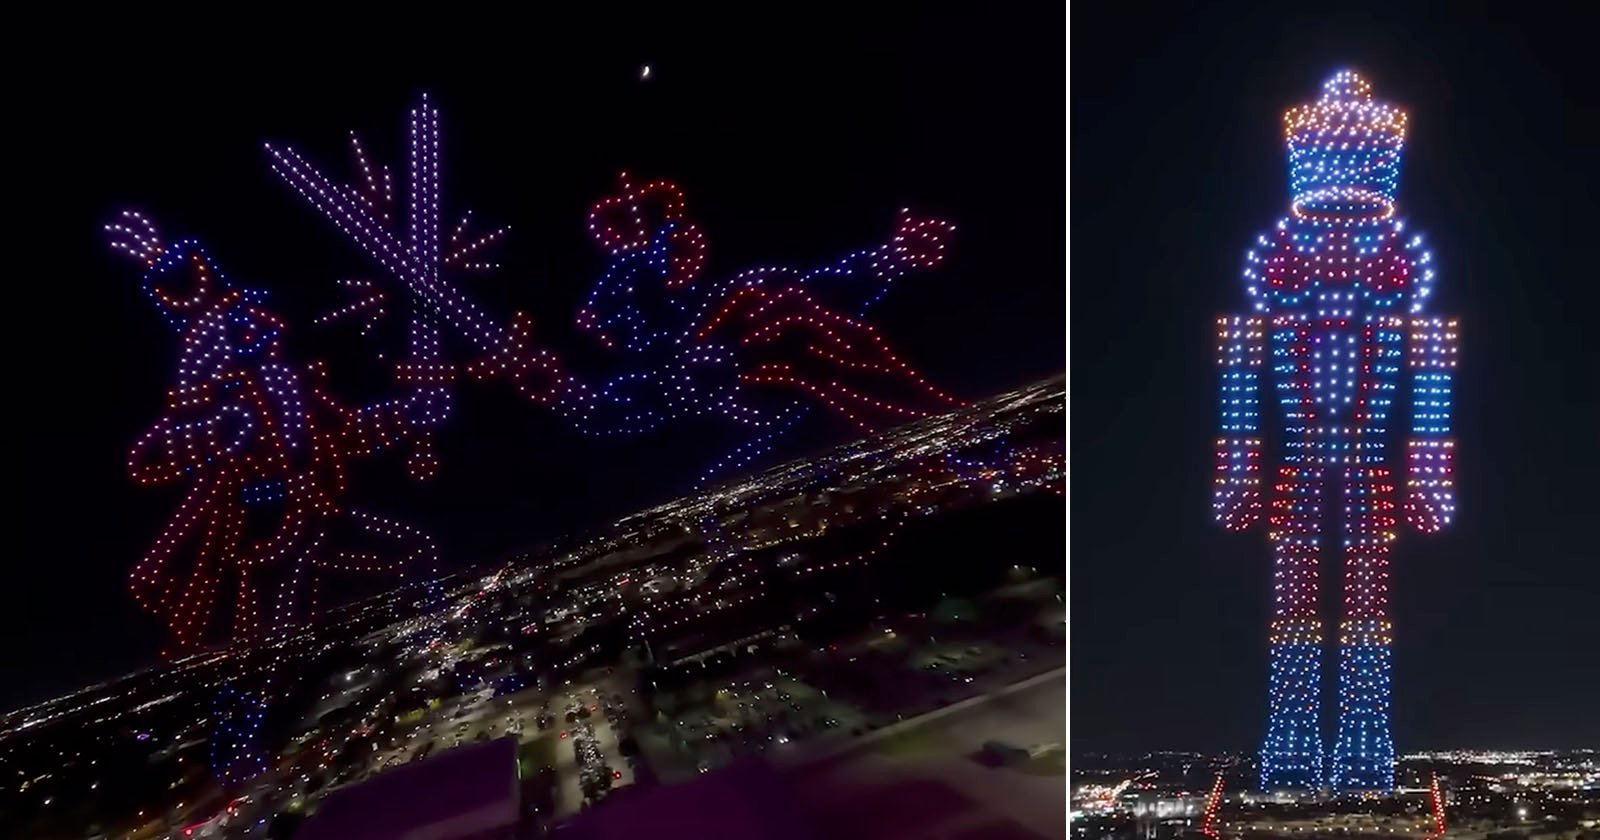 Scenes from a record breaking drone light show put on by Sky Elements.